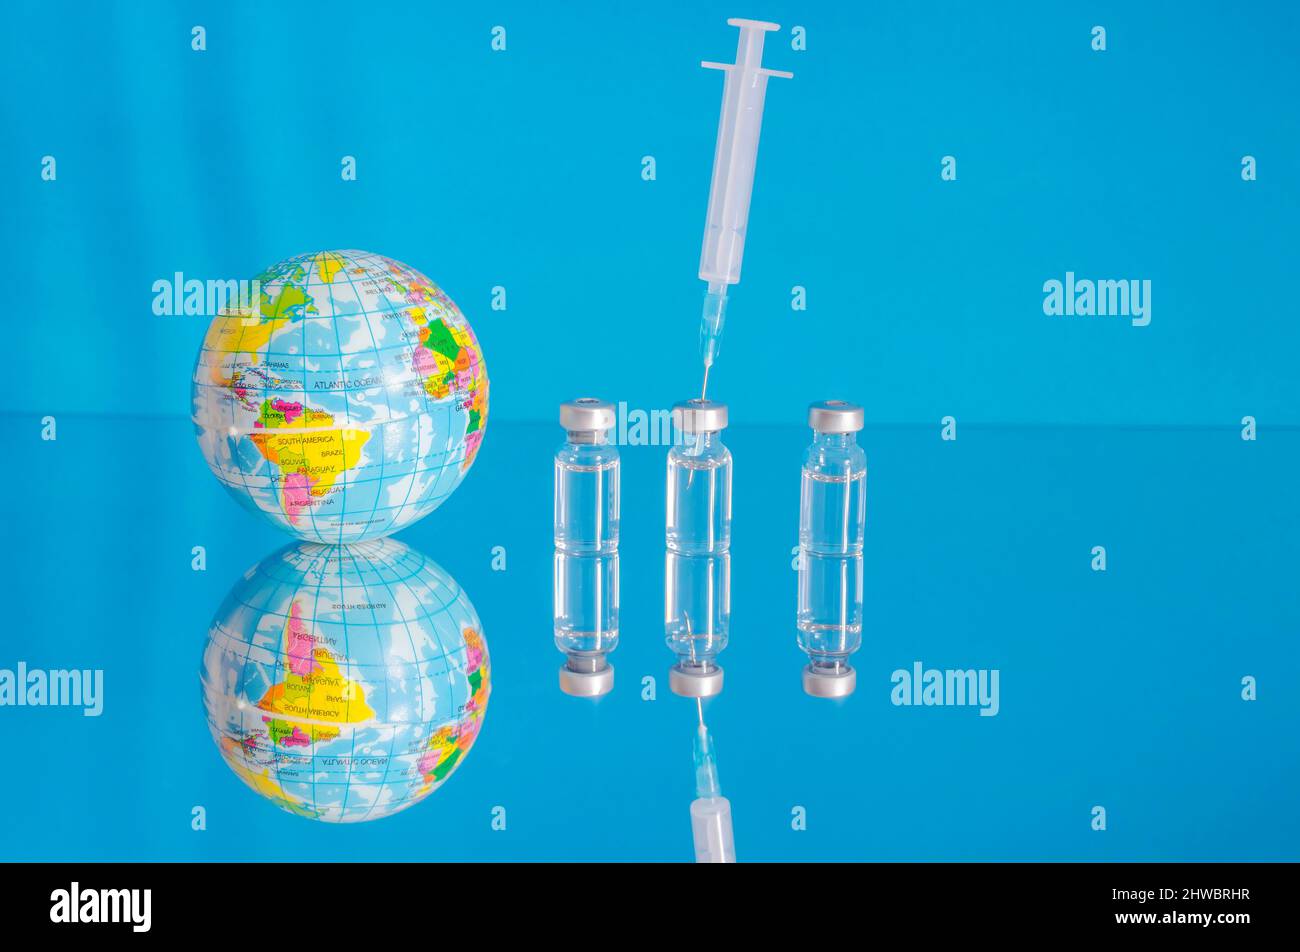 Vaccine bottles and syringe, treatment for COVID-19, influenza or flu, worldwide mass vaccination for coronavirus, global immunization concept with th Stock Photo